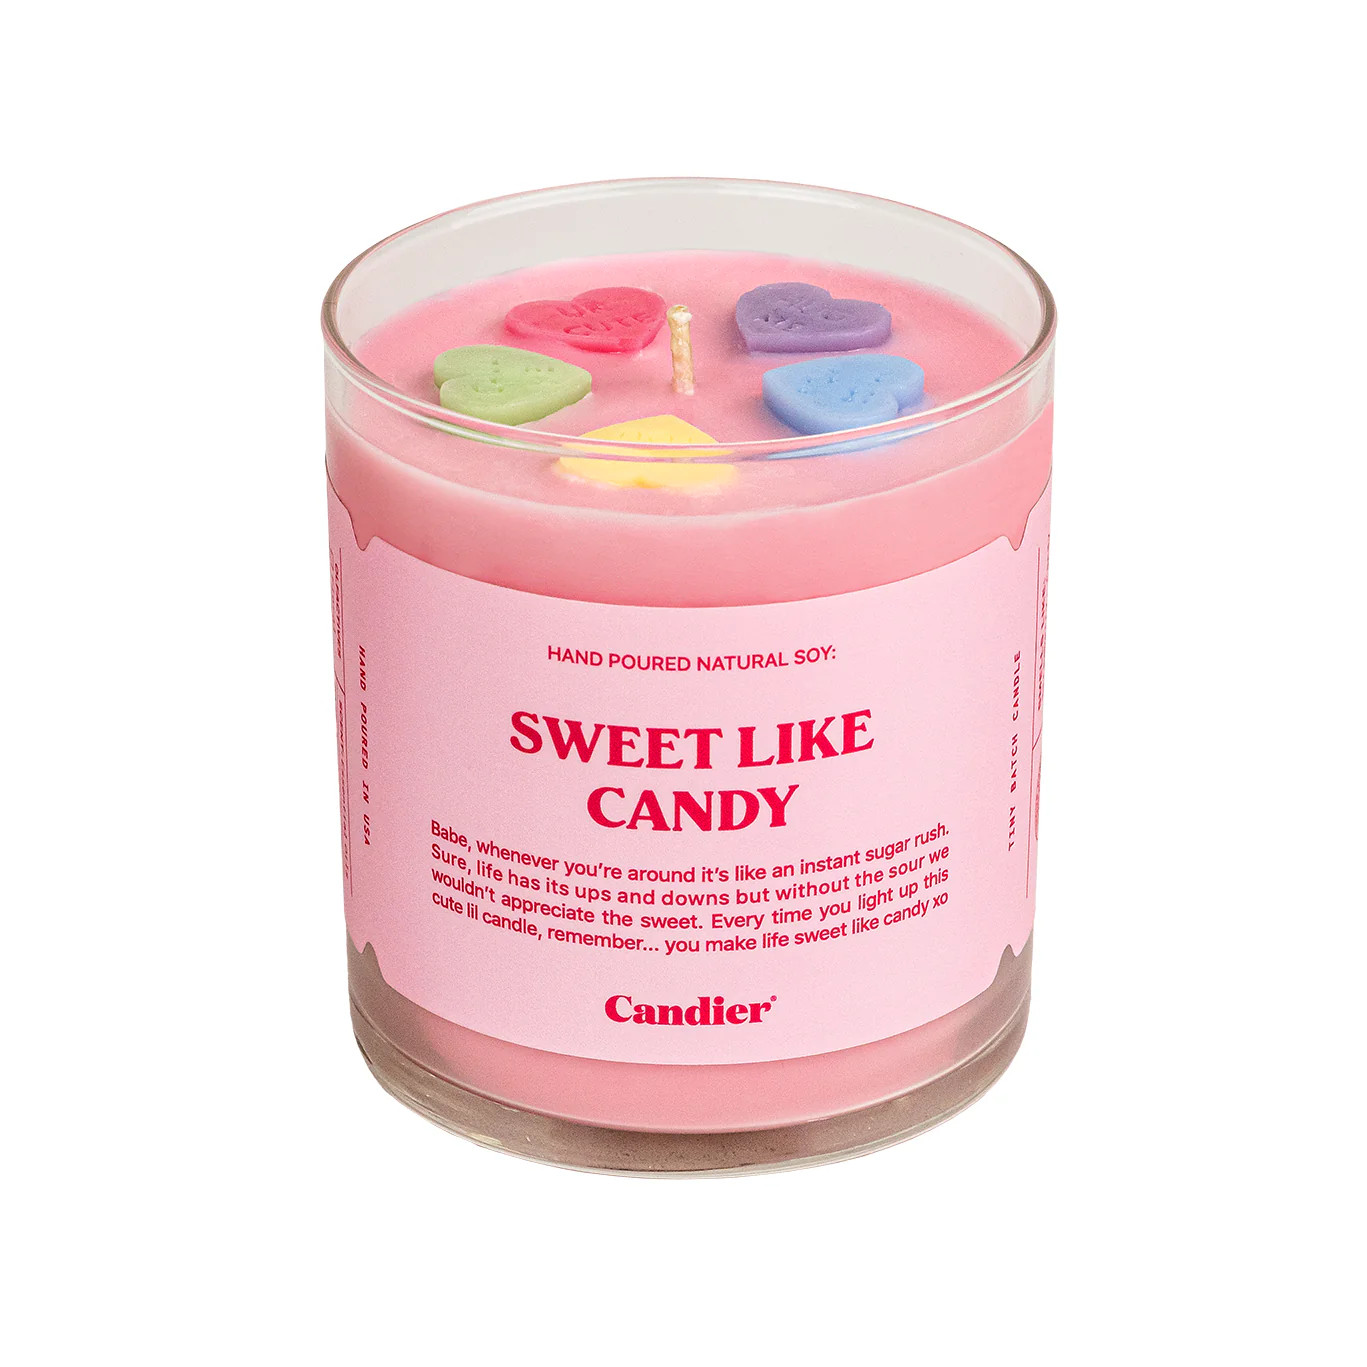 SWEET LIKE CANDY CANDLE | Candier by Ryan Porter